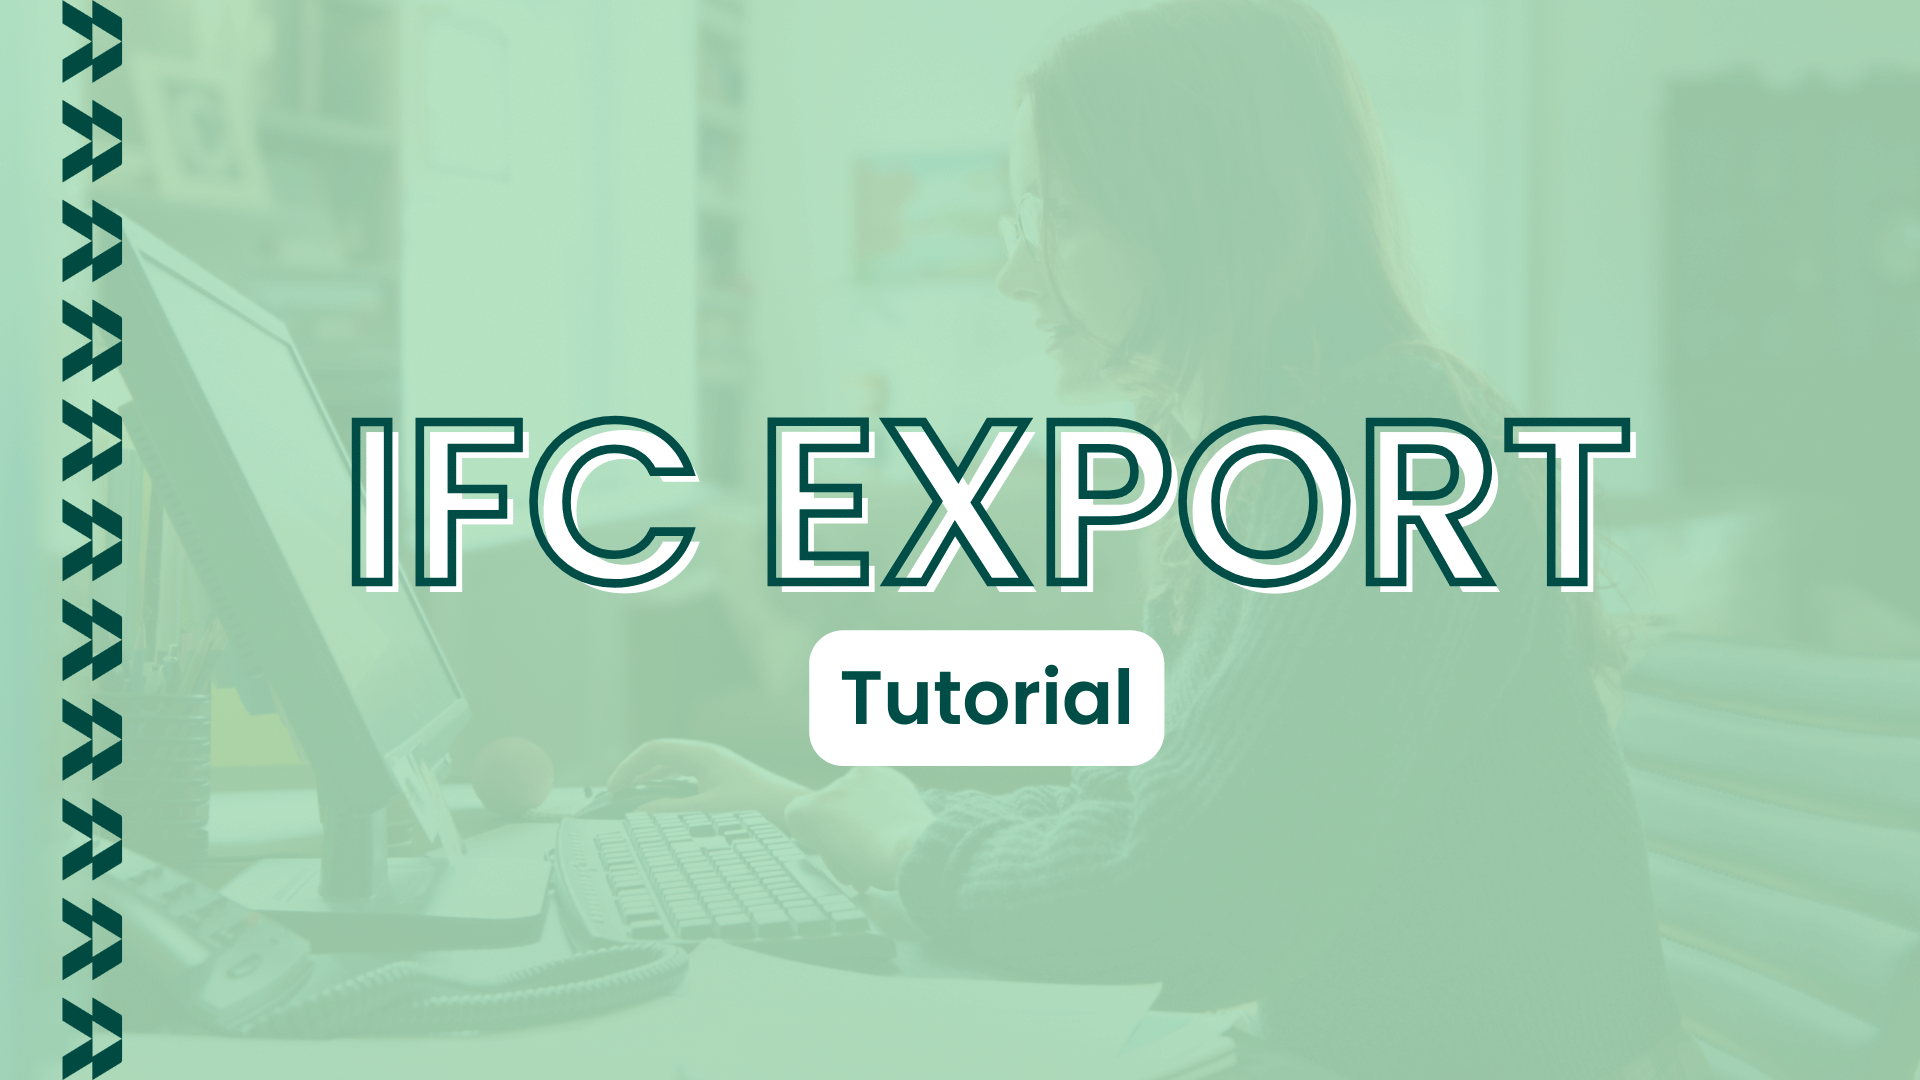 Discover how to export an IFC